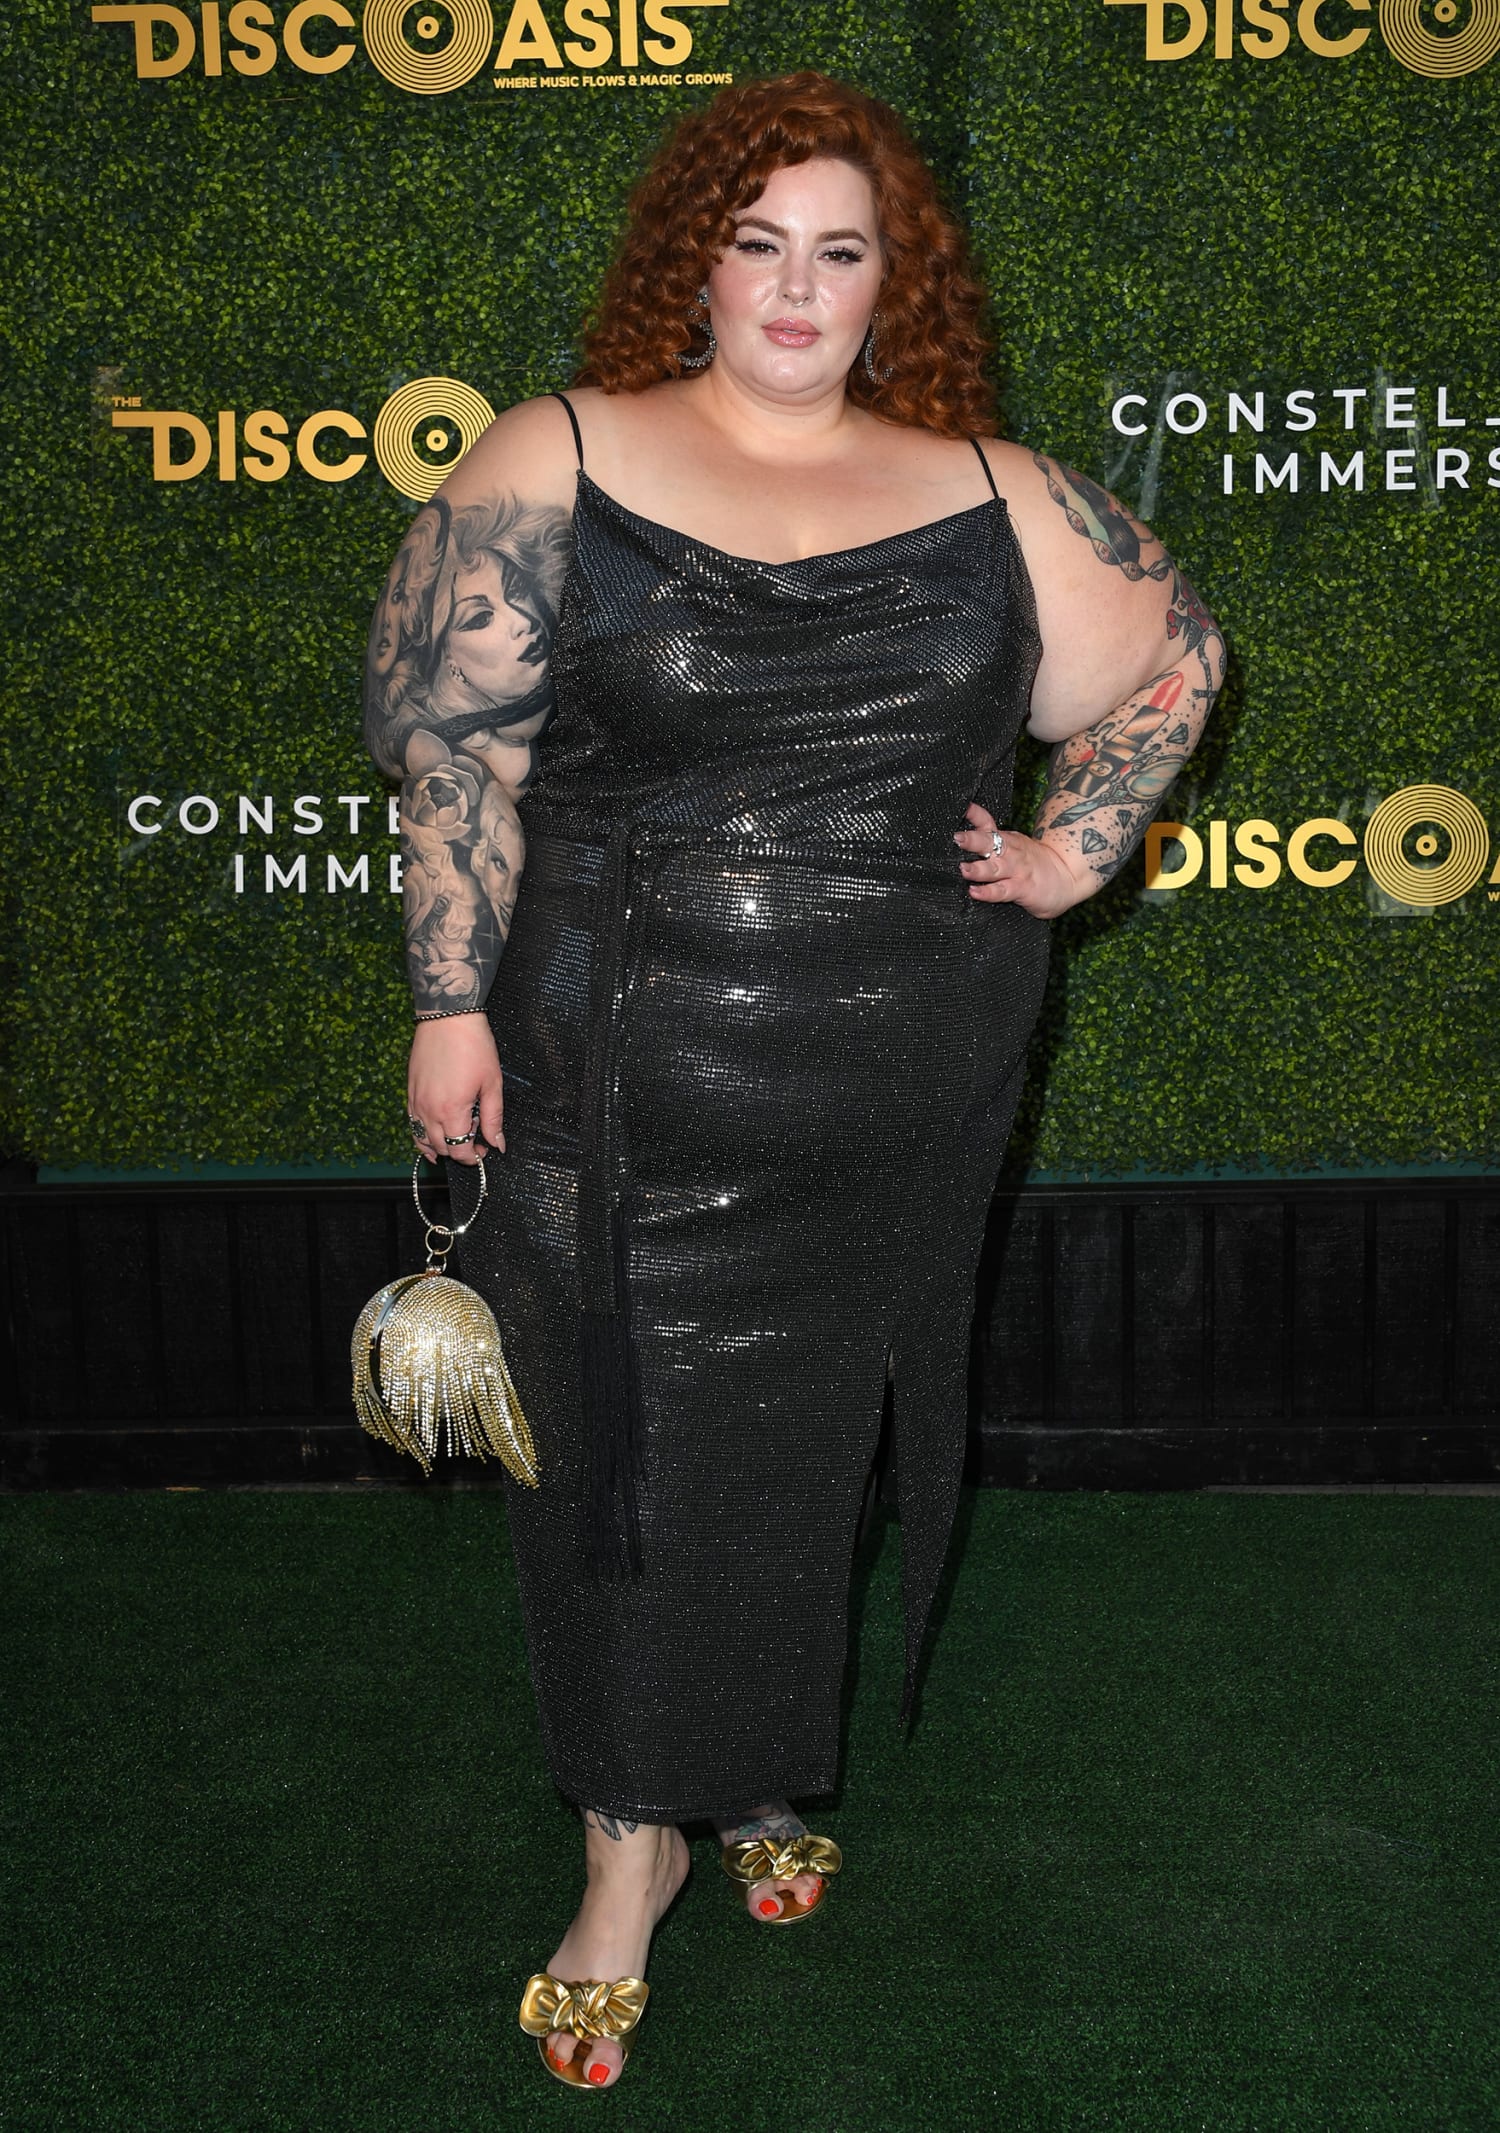 Body-positivity model Tess Holliday opens up about eating disorder - ABC  News